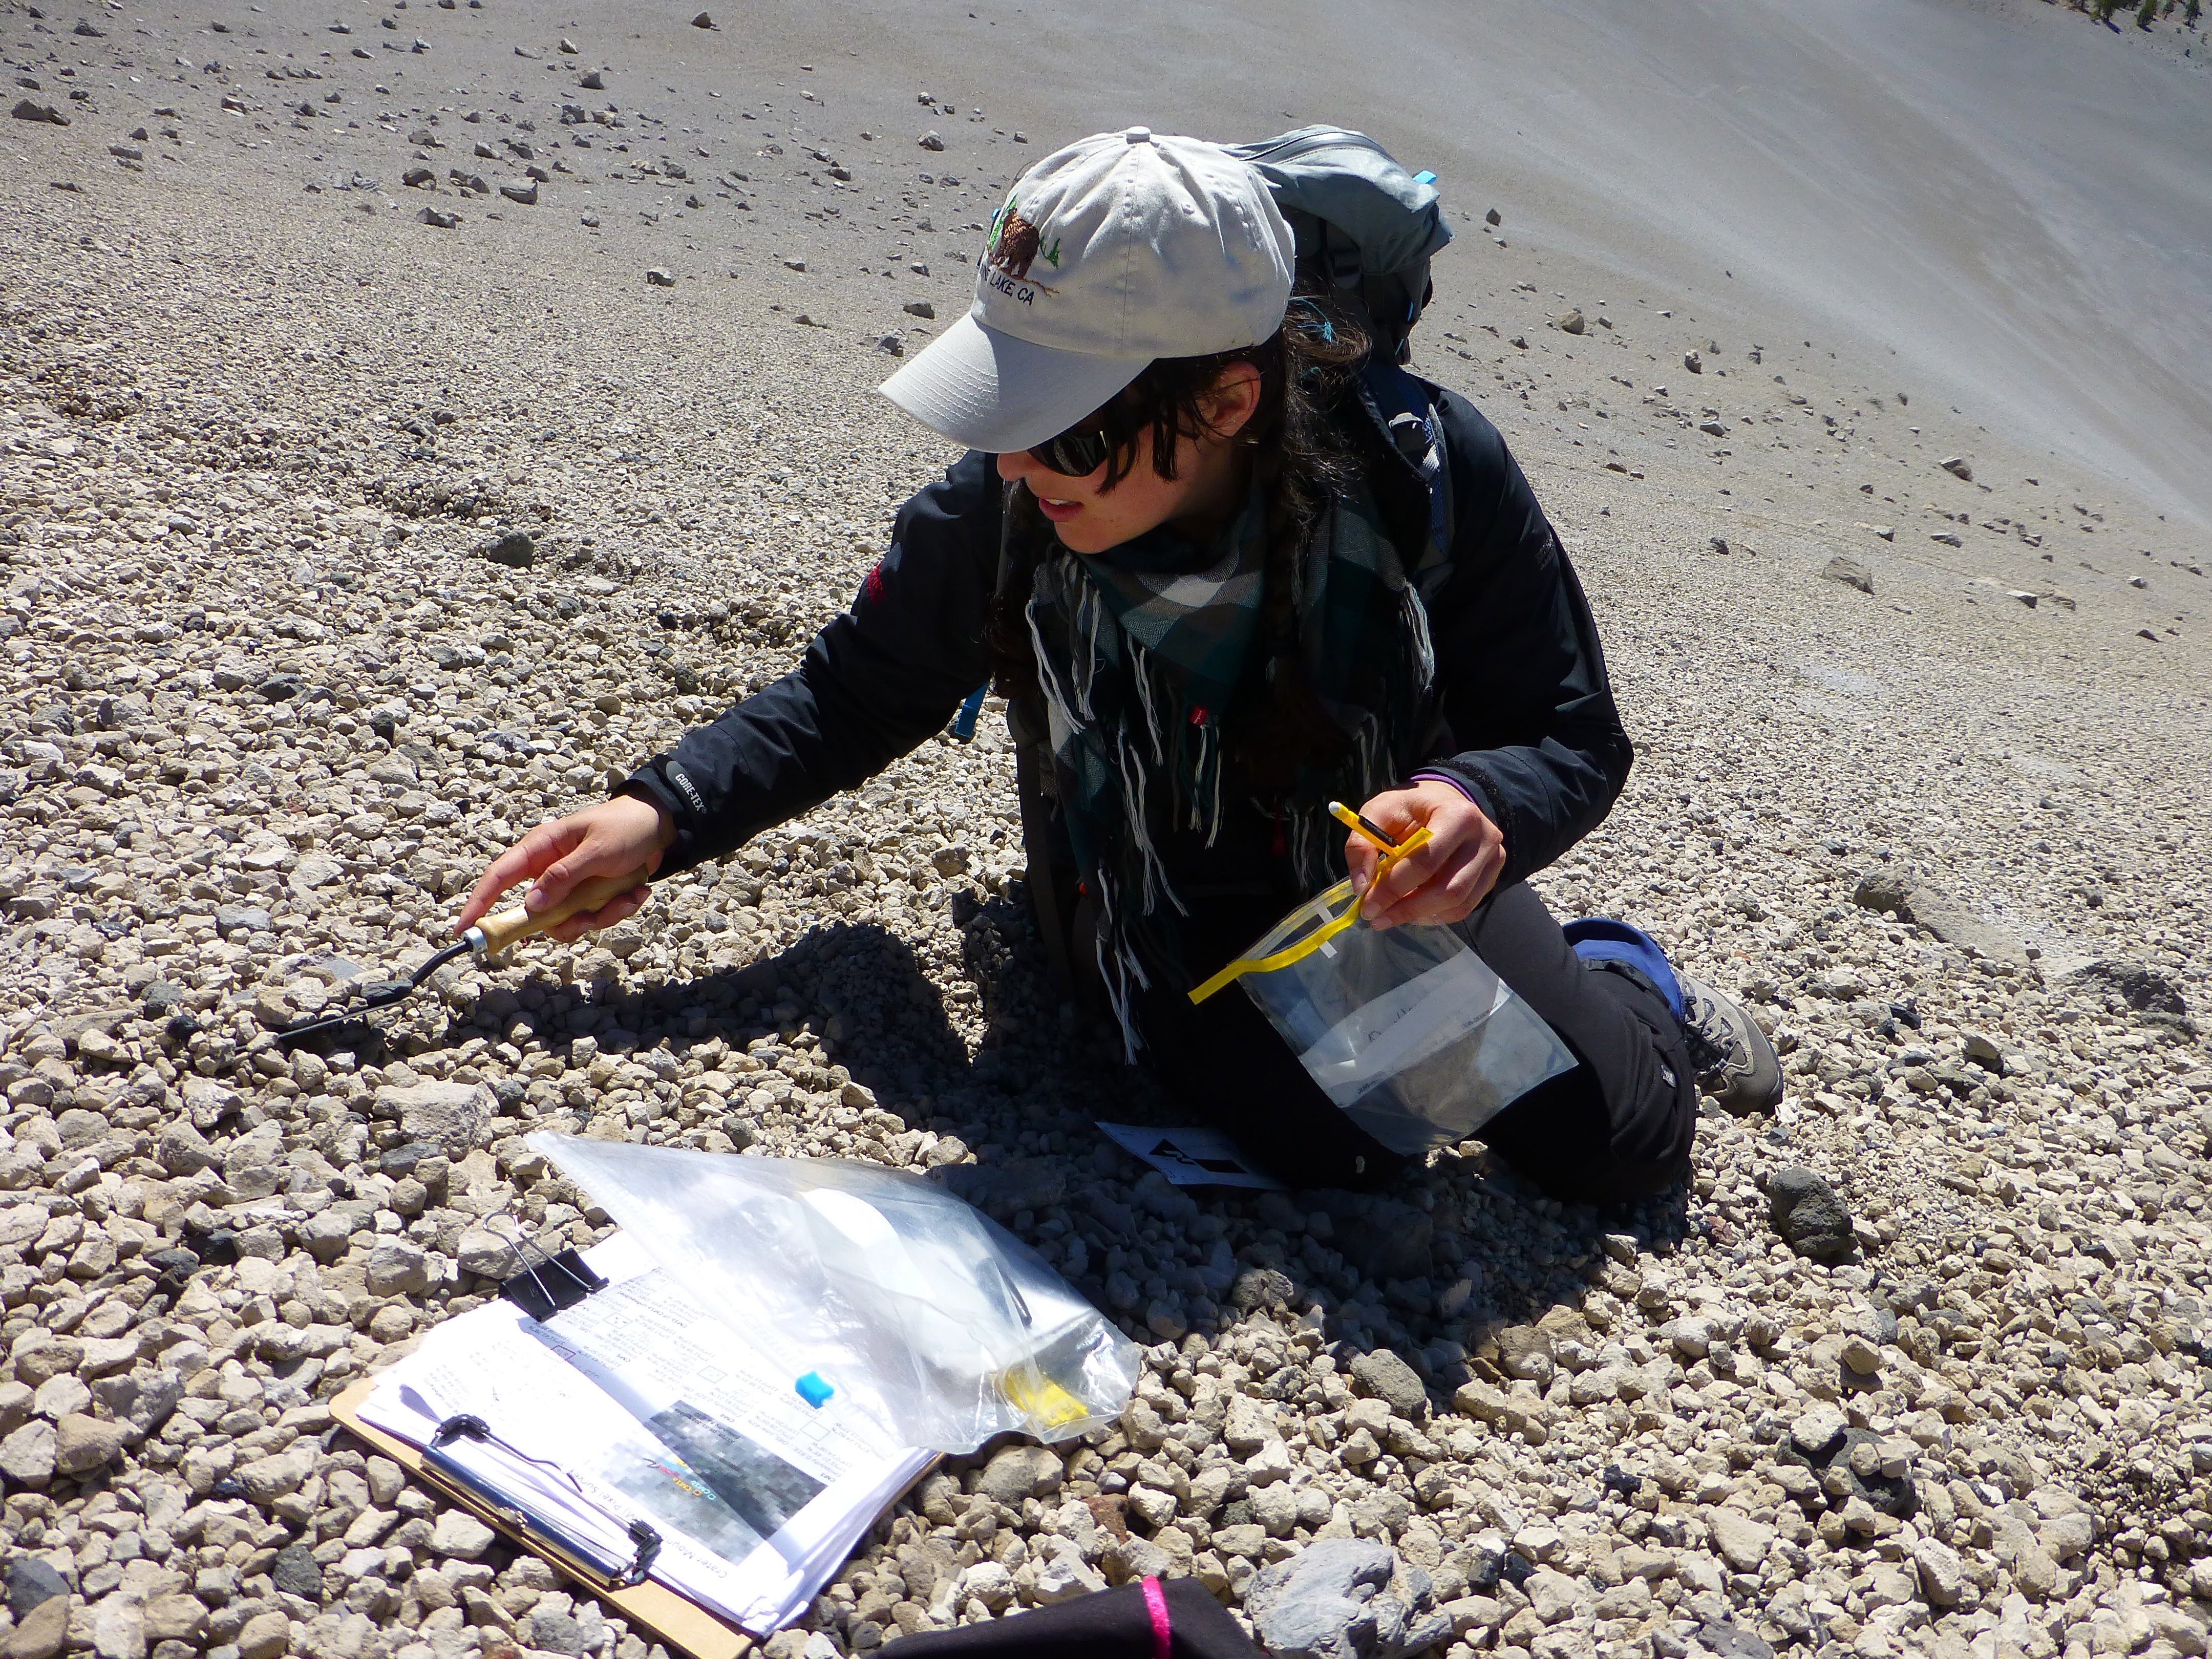 Janine Krippner collects sediment samples at volcano site.